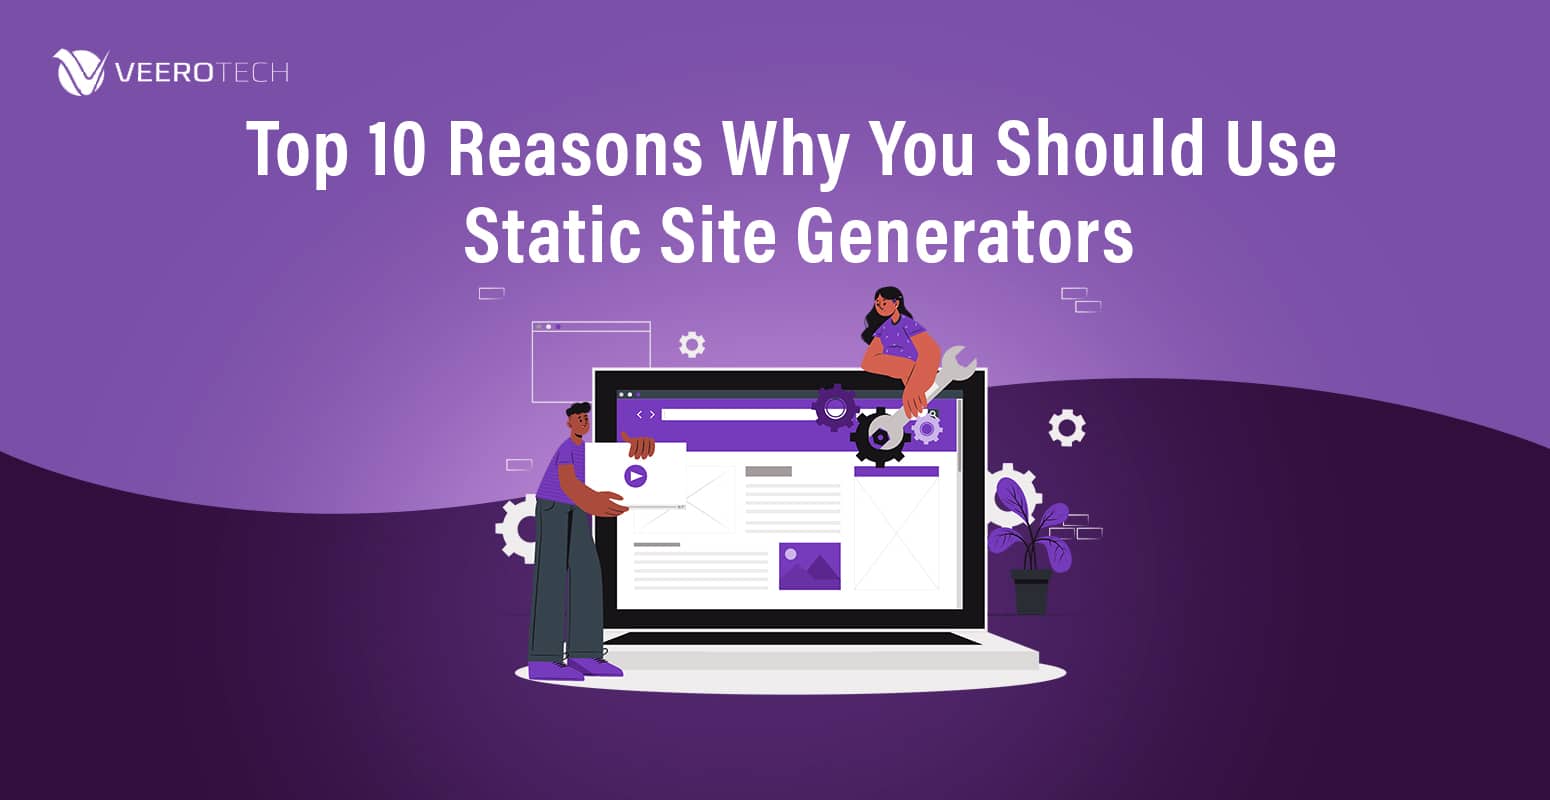 Top 10 Reasons Why You Should Use Static Site Generators